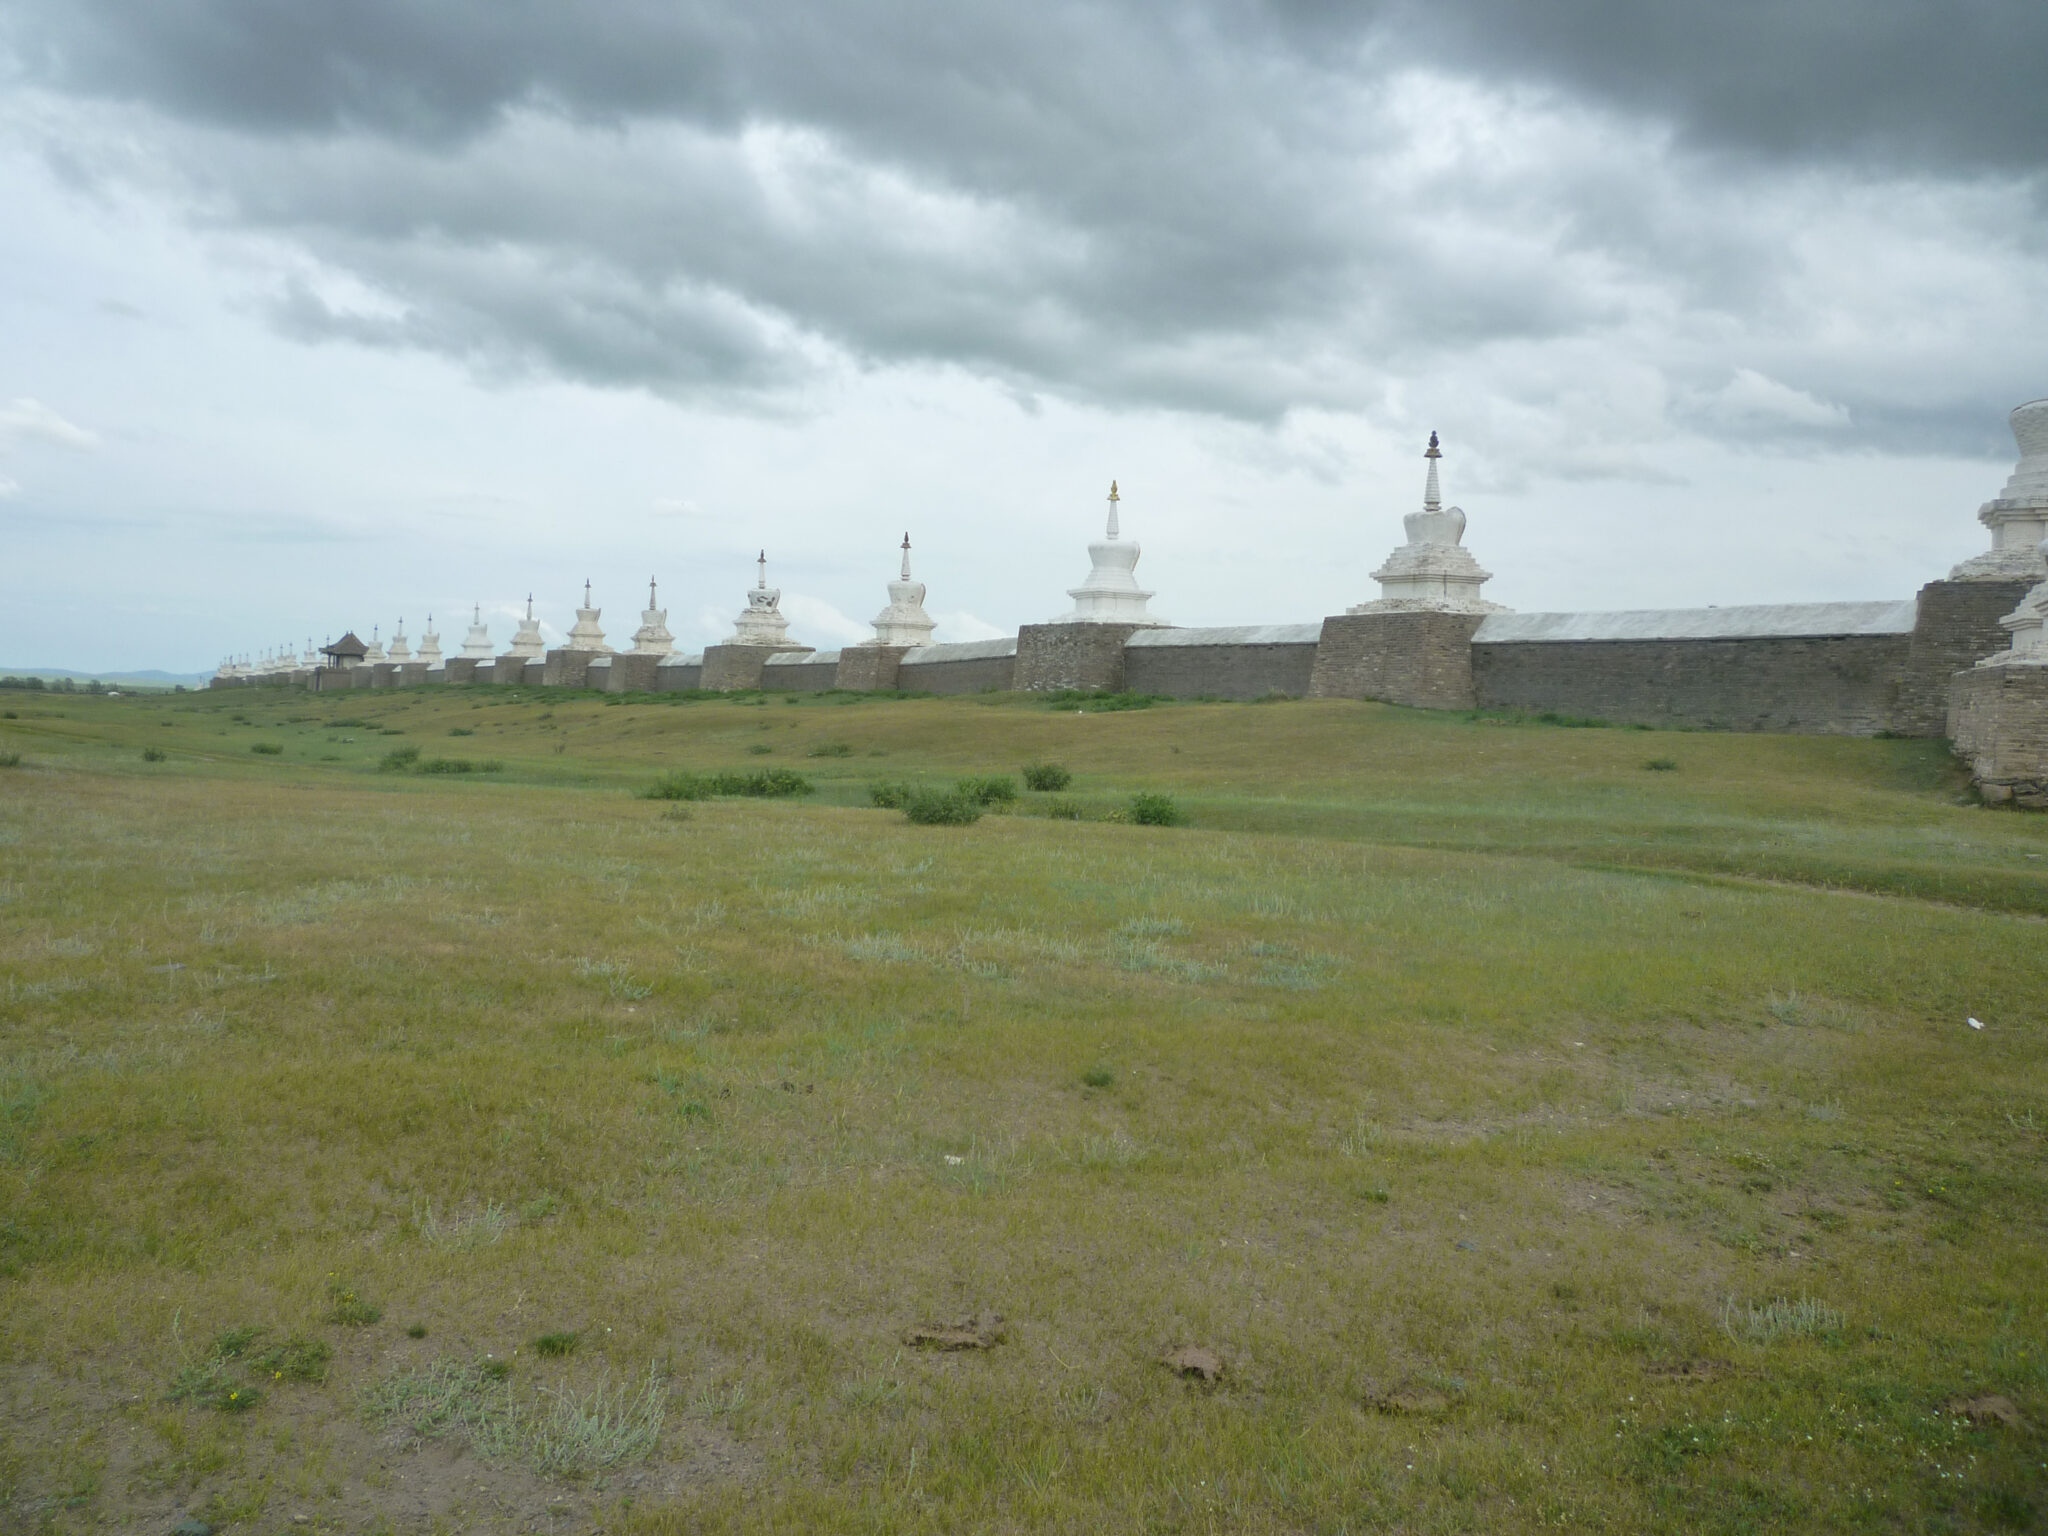 Long wall punctuated by white stupas at regular intervals stretches into distance under leaden sky